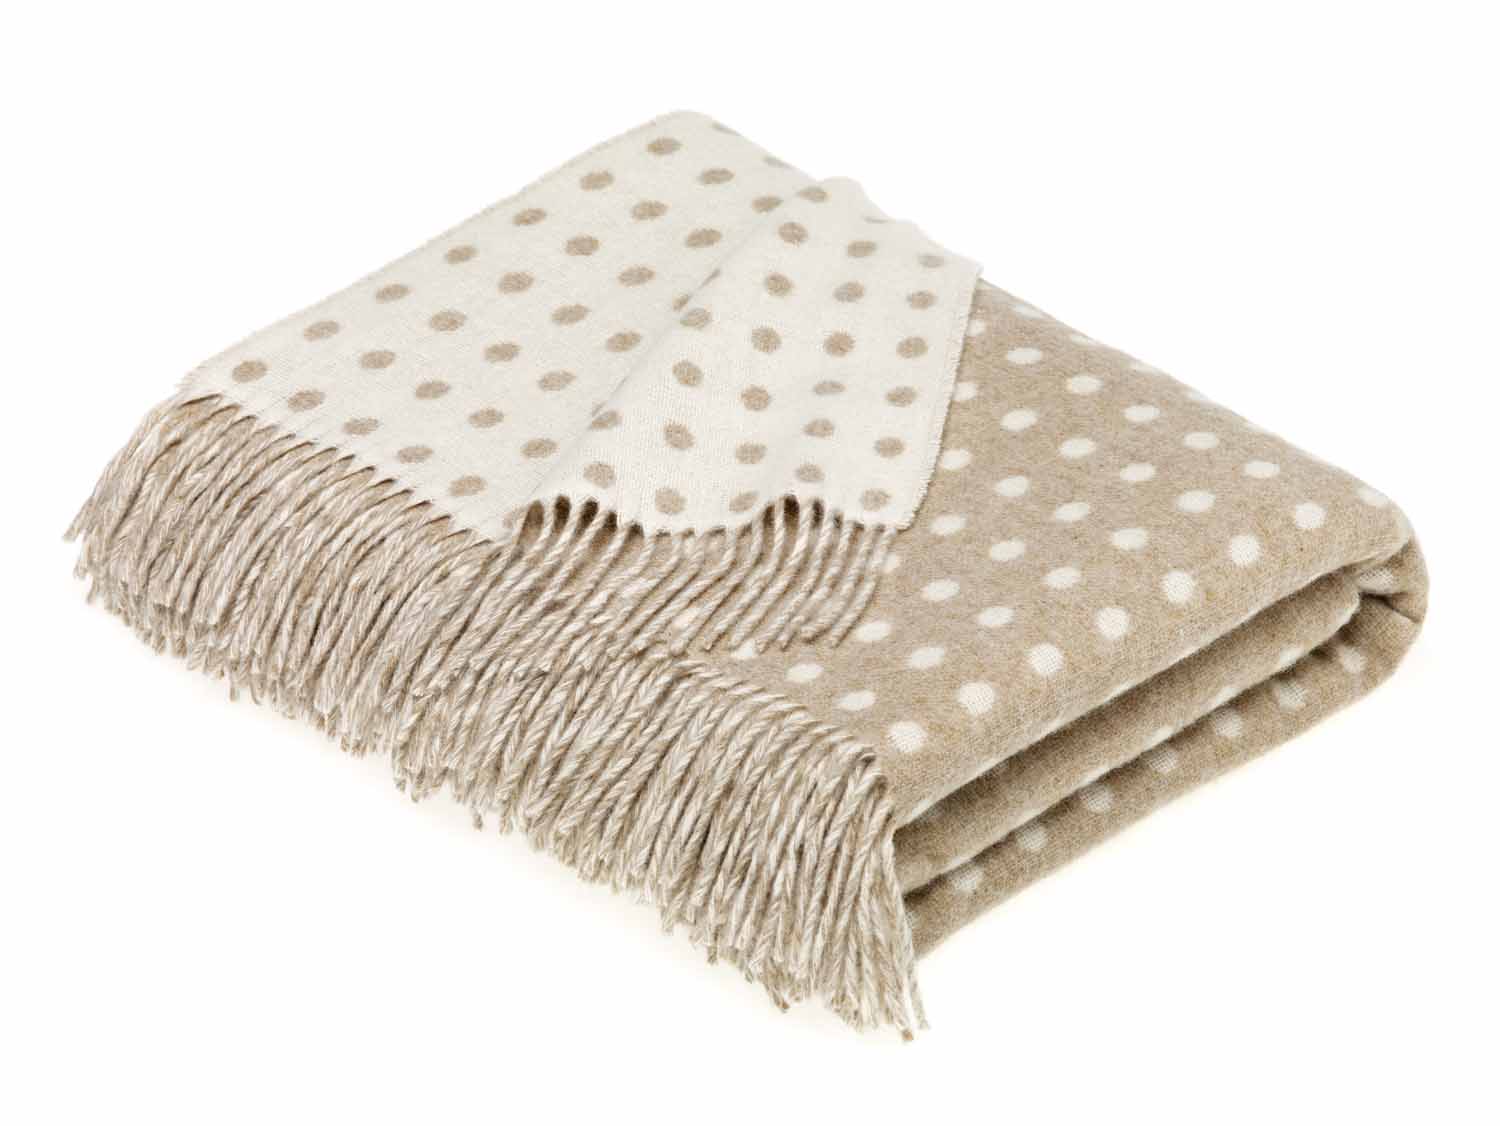 Bronte by Moon Natural Spot Lambswool Throw